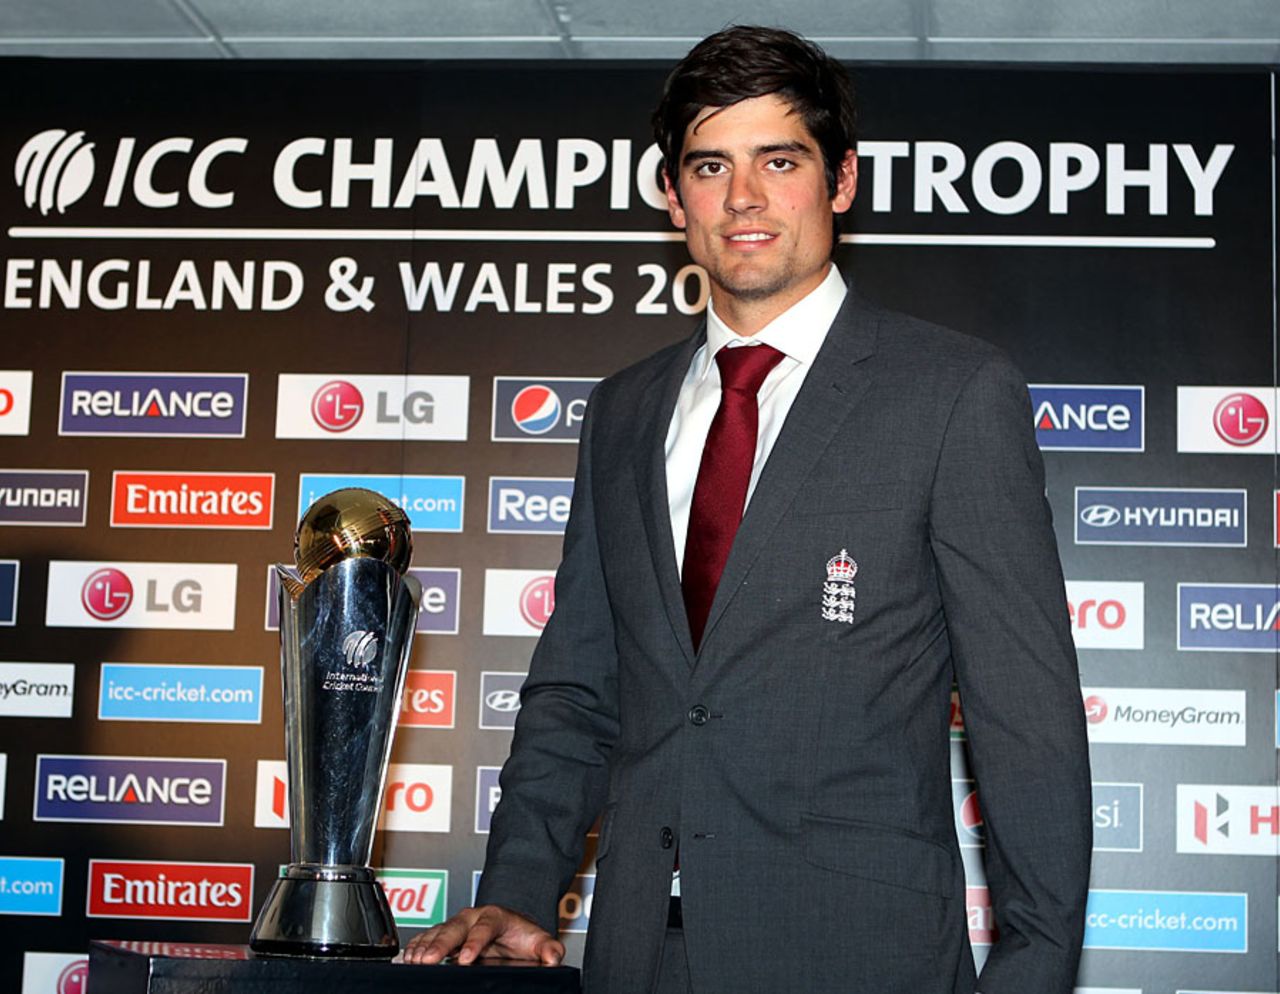 Alastair Cook at the launch of the Champions Trophy, London, October 17, 2012